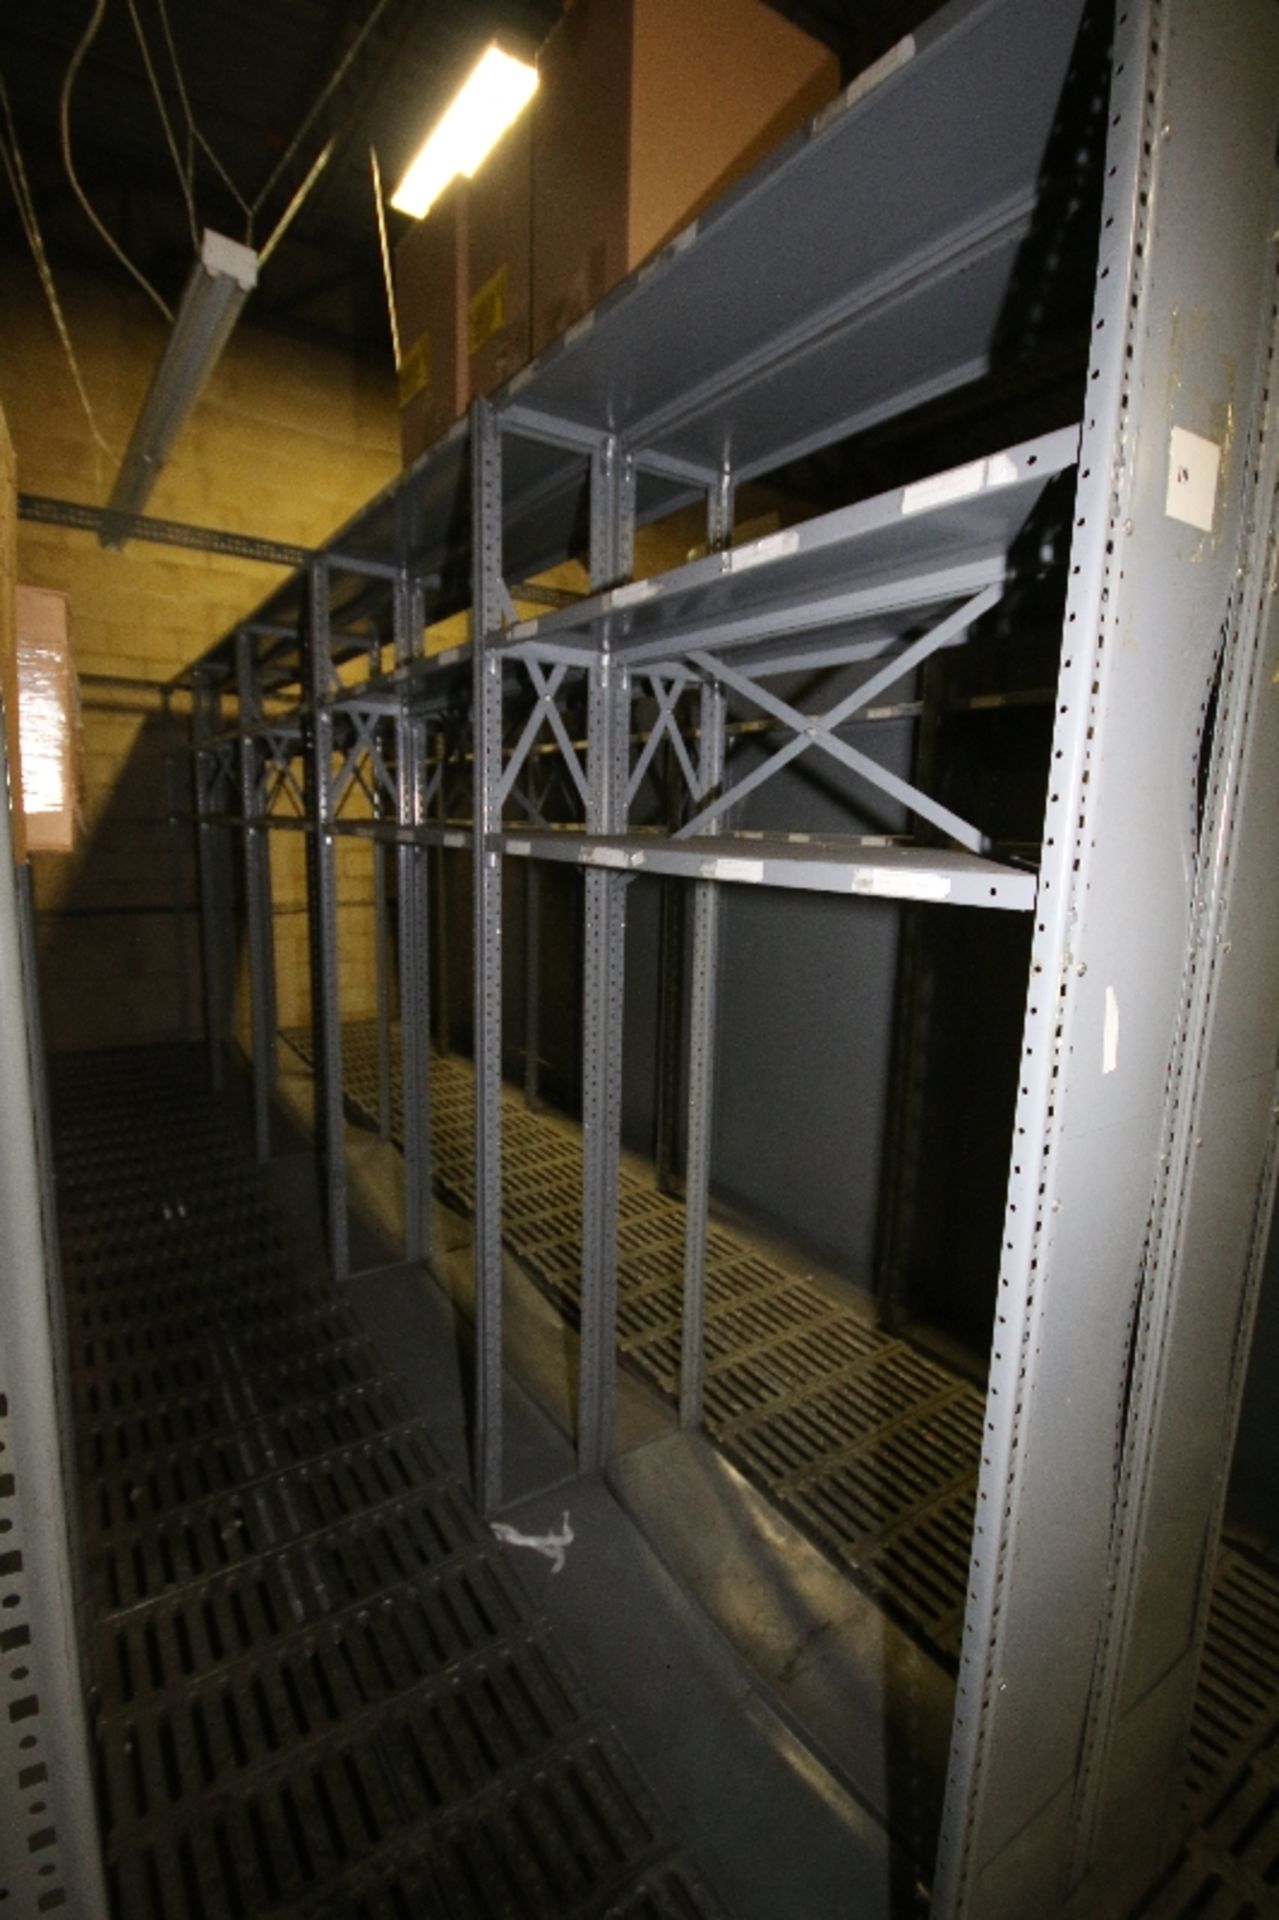 Parts Mezzanine with Parts Shelving, Includes Aprox. (14) Shelves and Aprox. 18' L x 12' W Mezzanine - Image 2 of 2